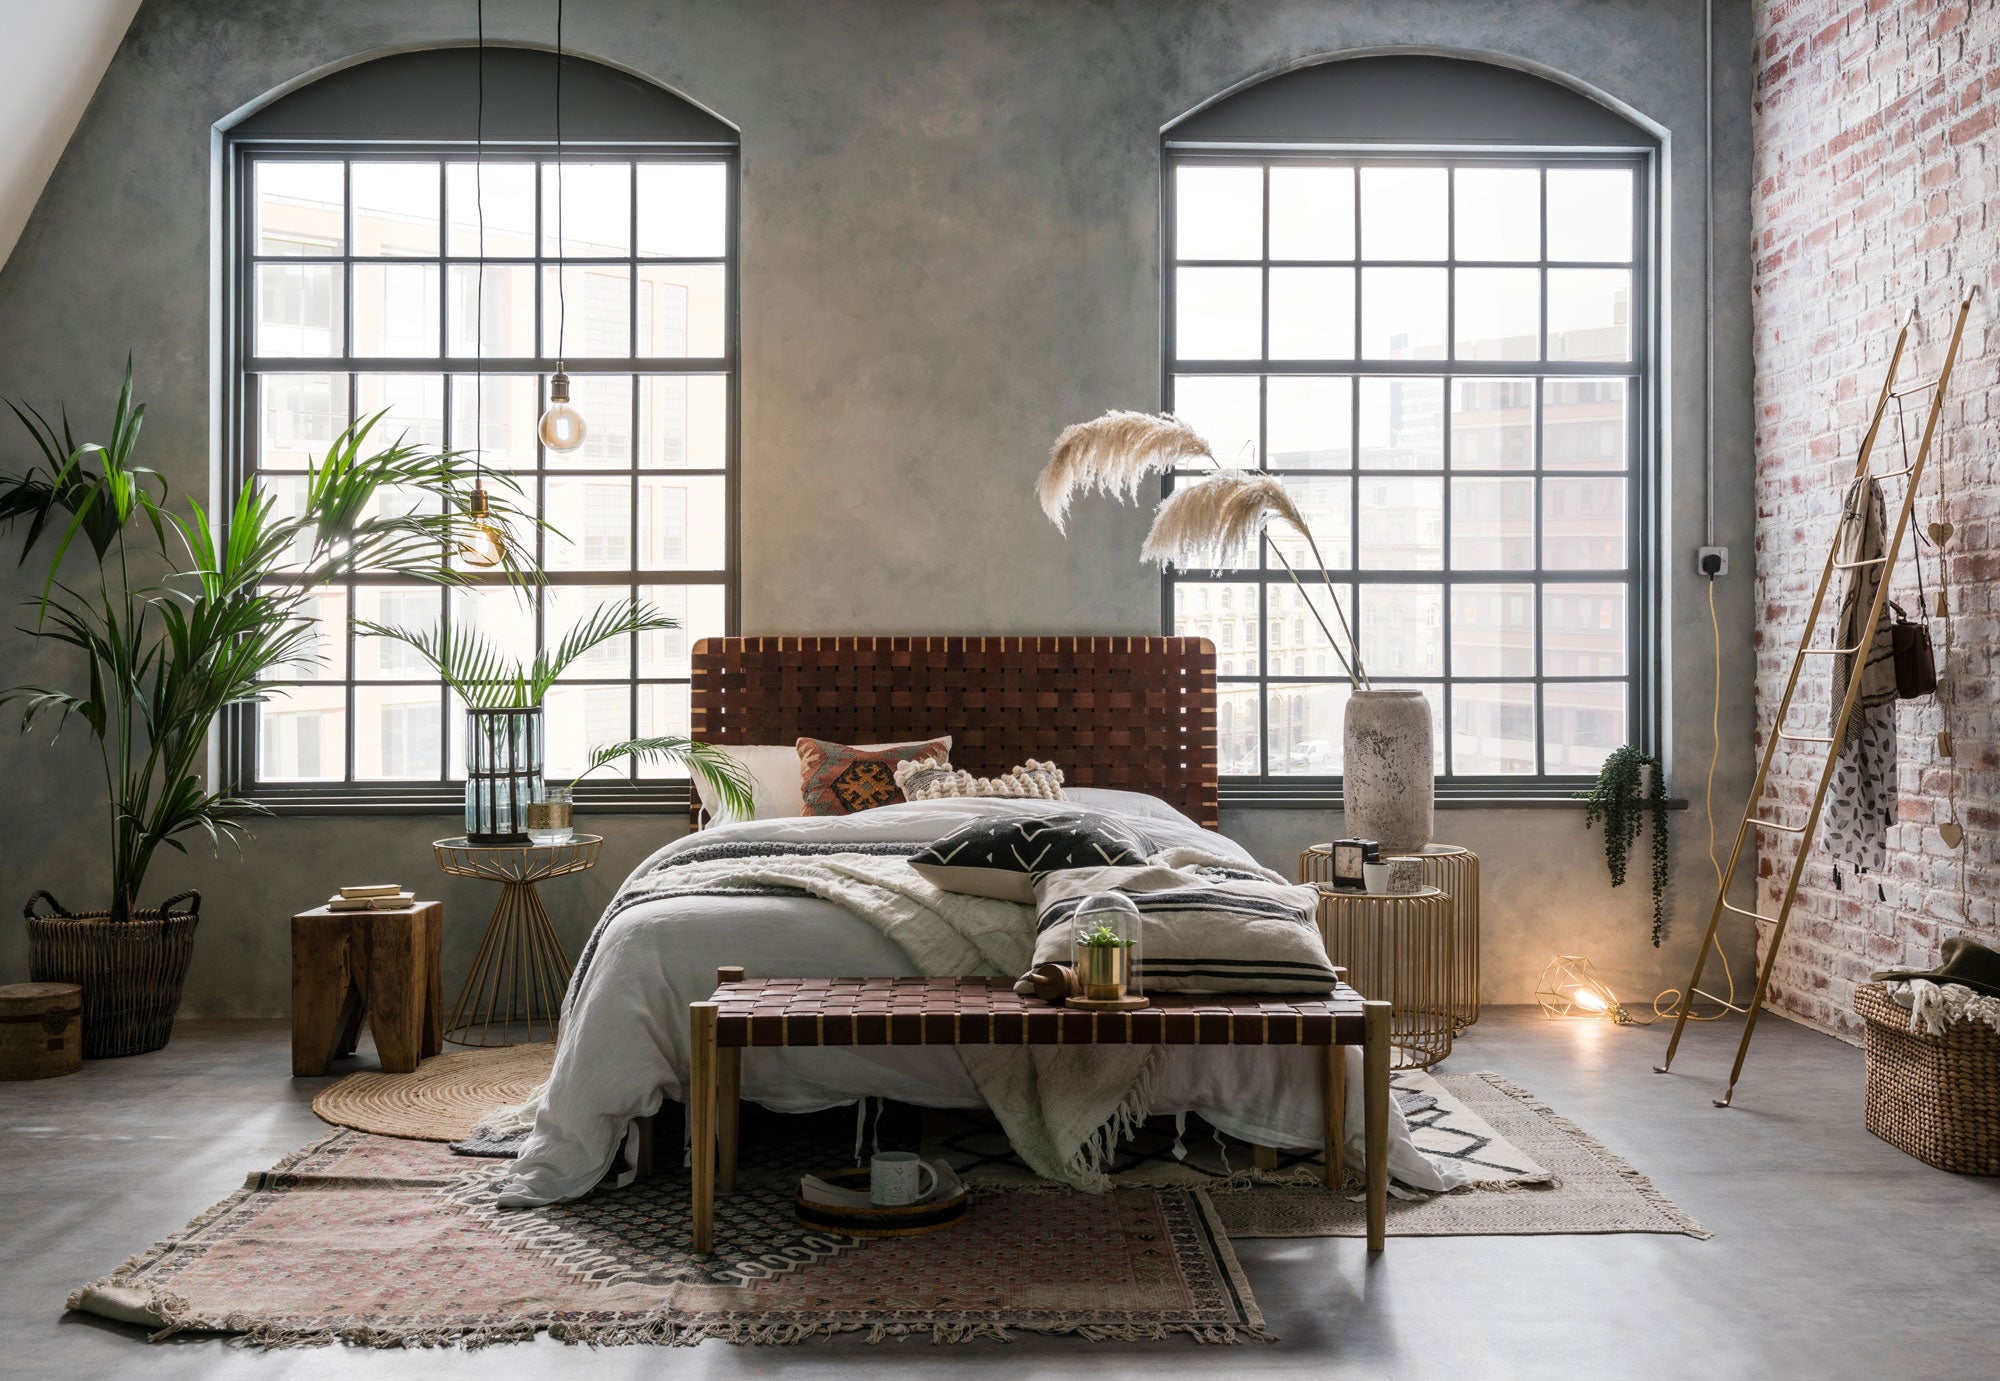 Industrial style bedroom featuring woven leather furniture and metallic furniture pieces from Cuckooland